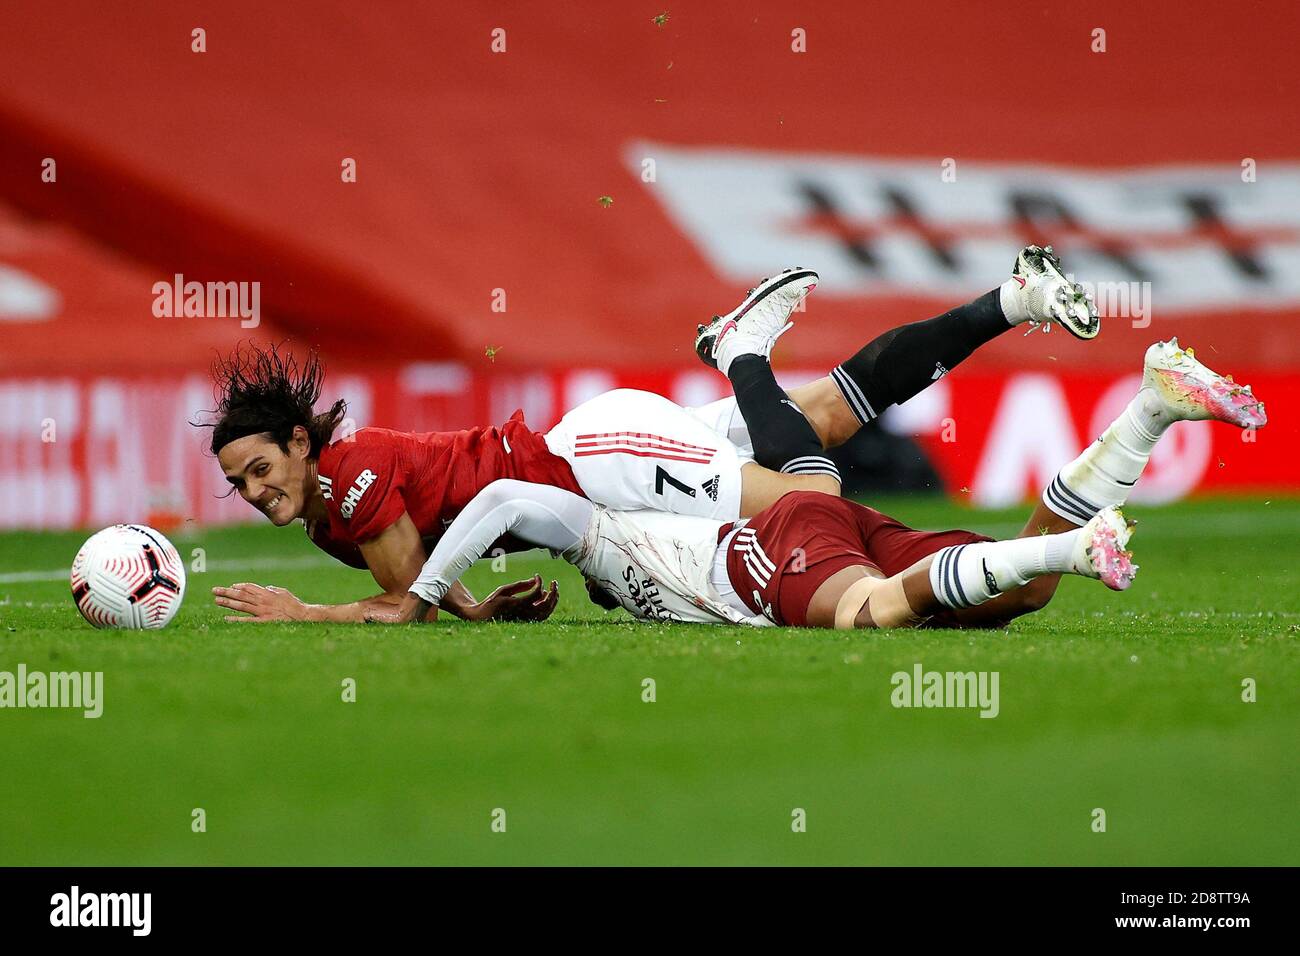 Manchester Uniteds Edinson Cavani fouls Arsenals Gabriel Magalhaes which results in a yellow card during the Premier League match at Old Trafford, Manchester Stock Photo